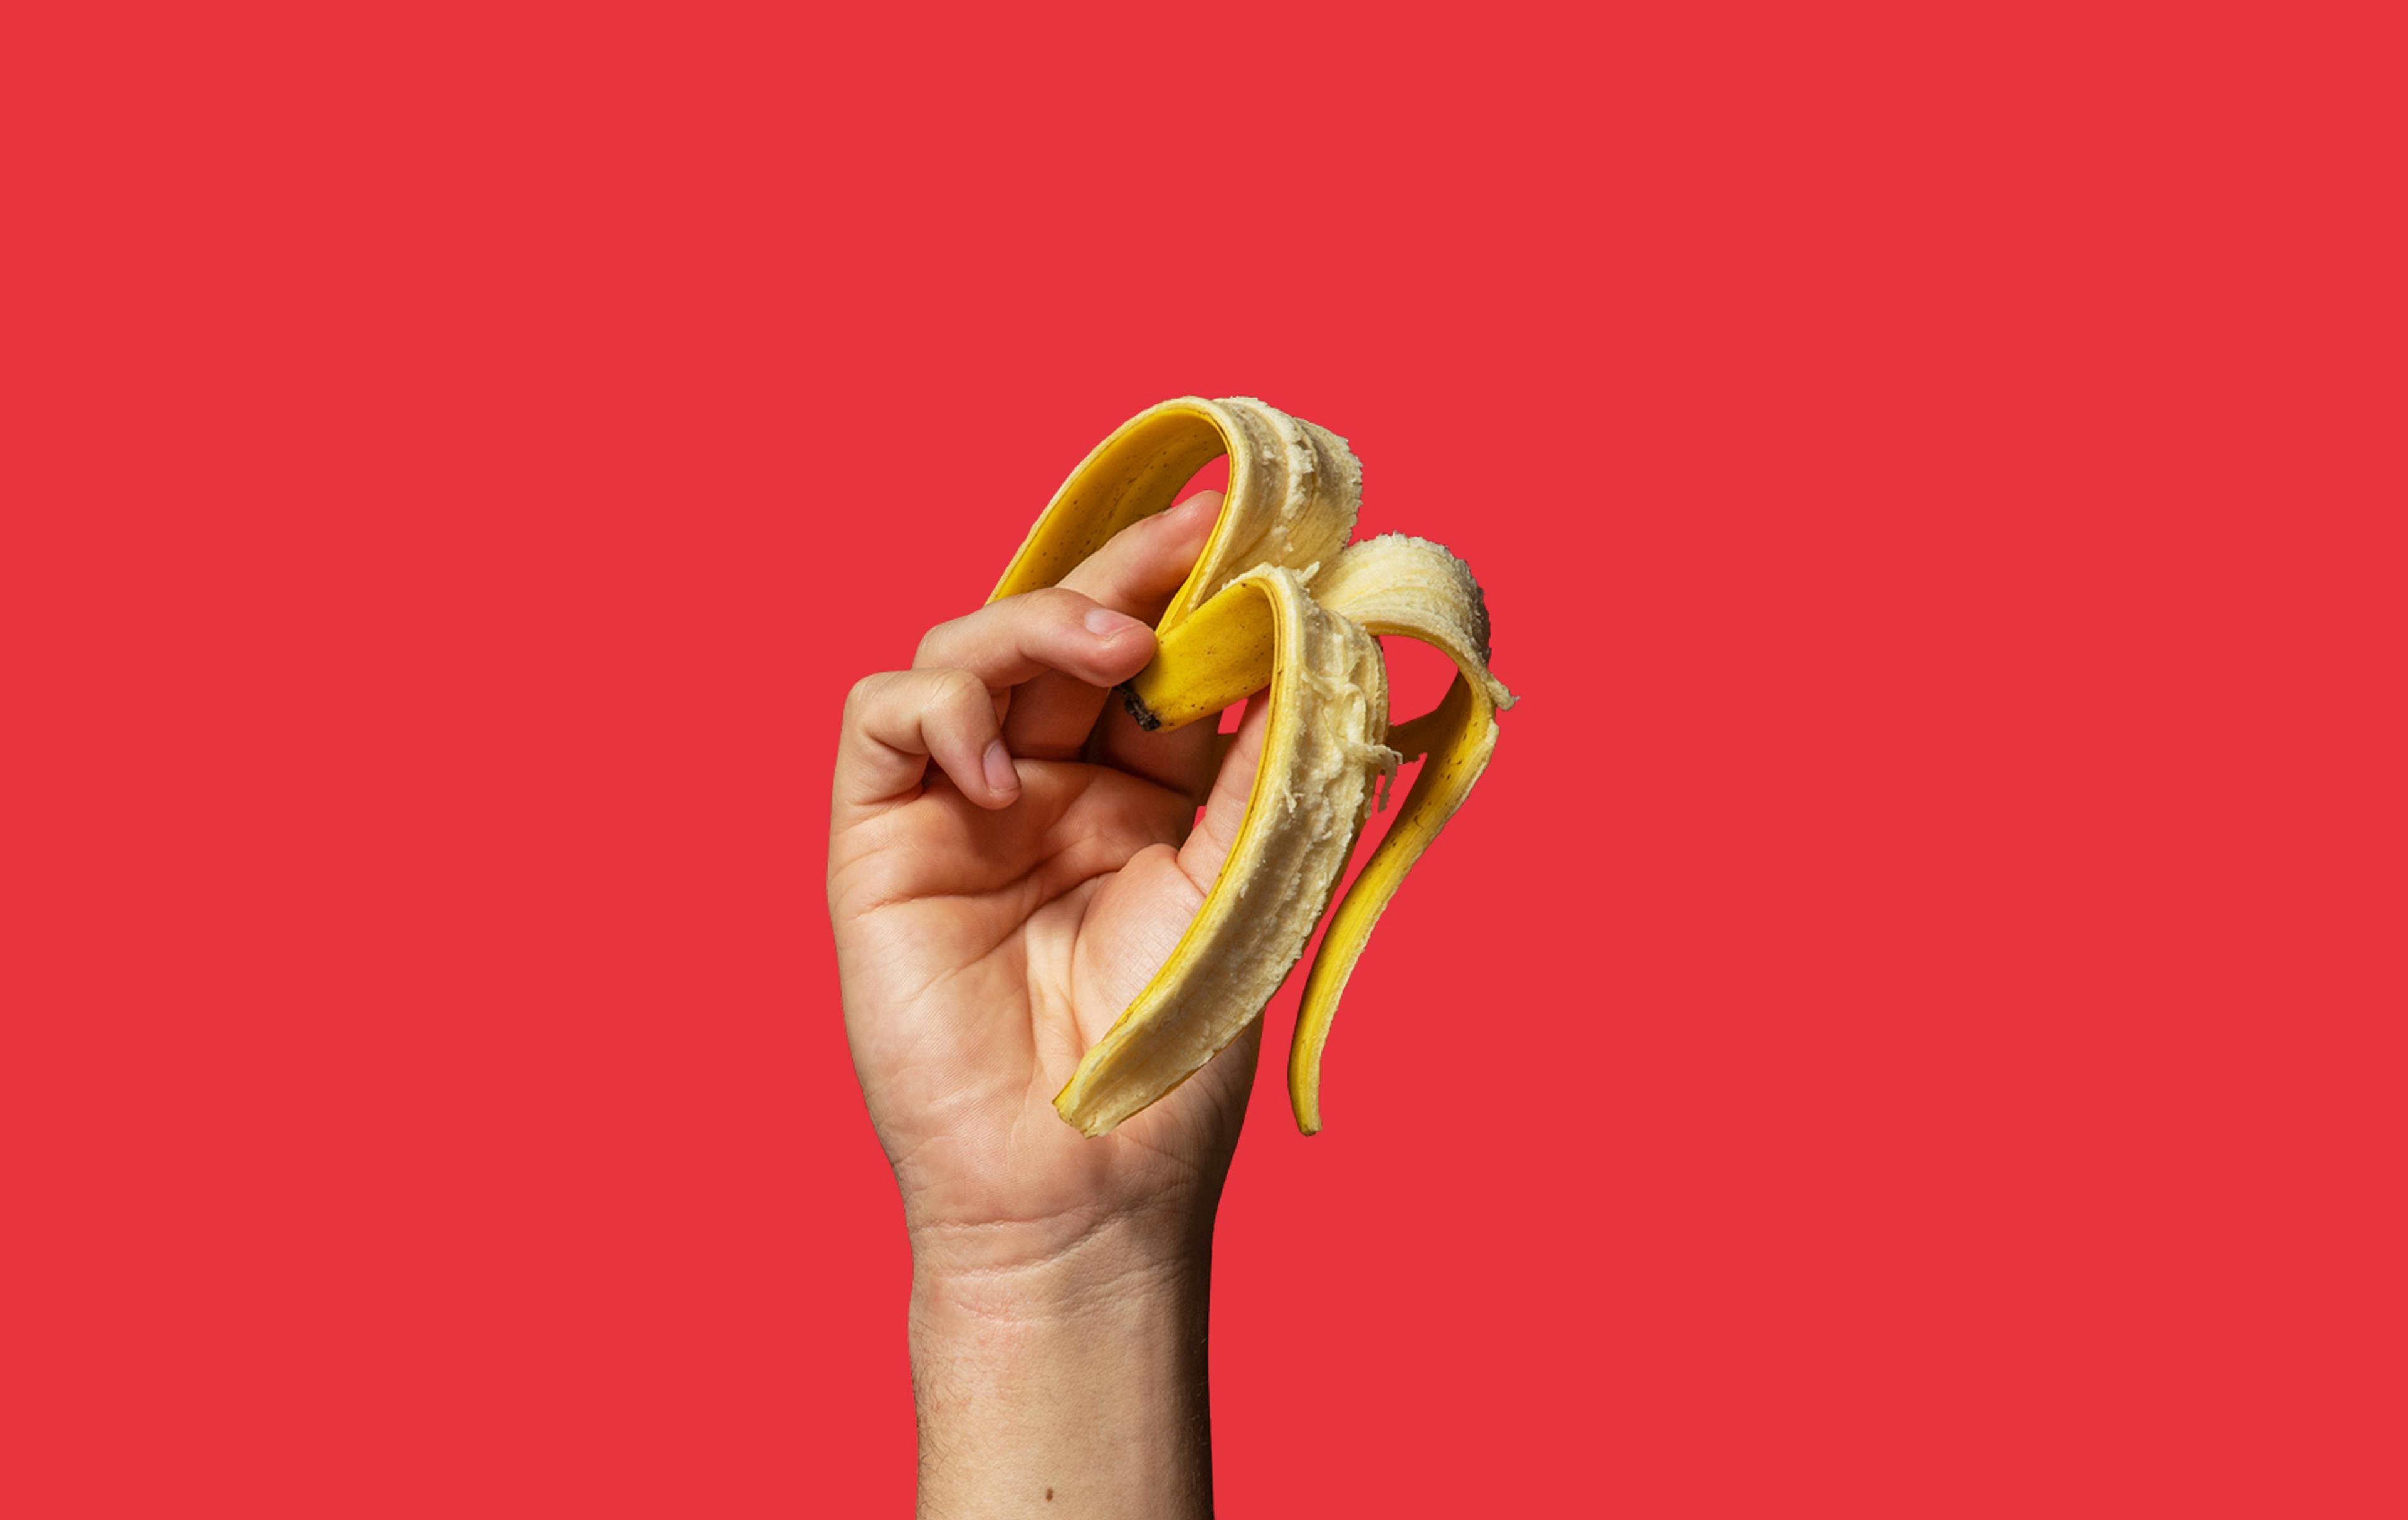 Hand holding a banana skin on a red background